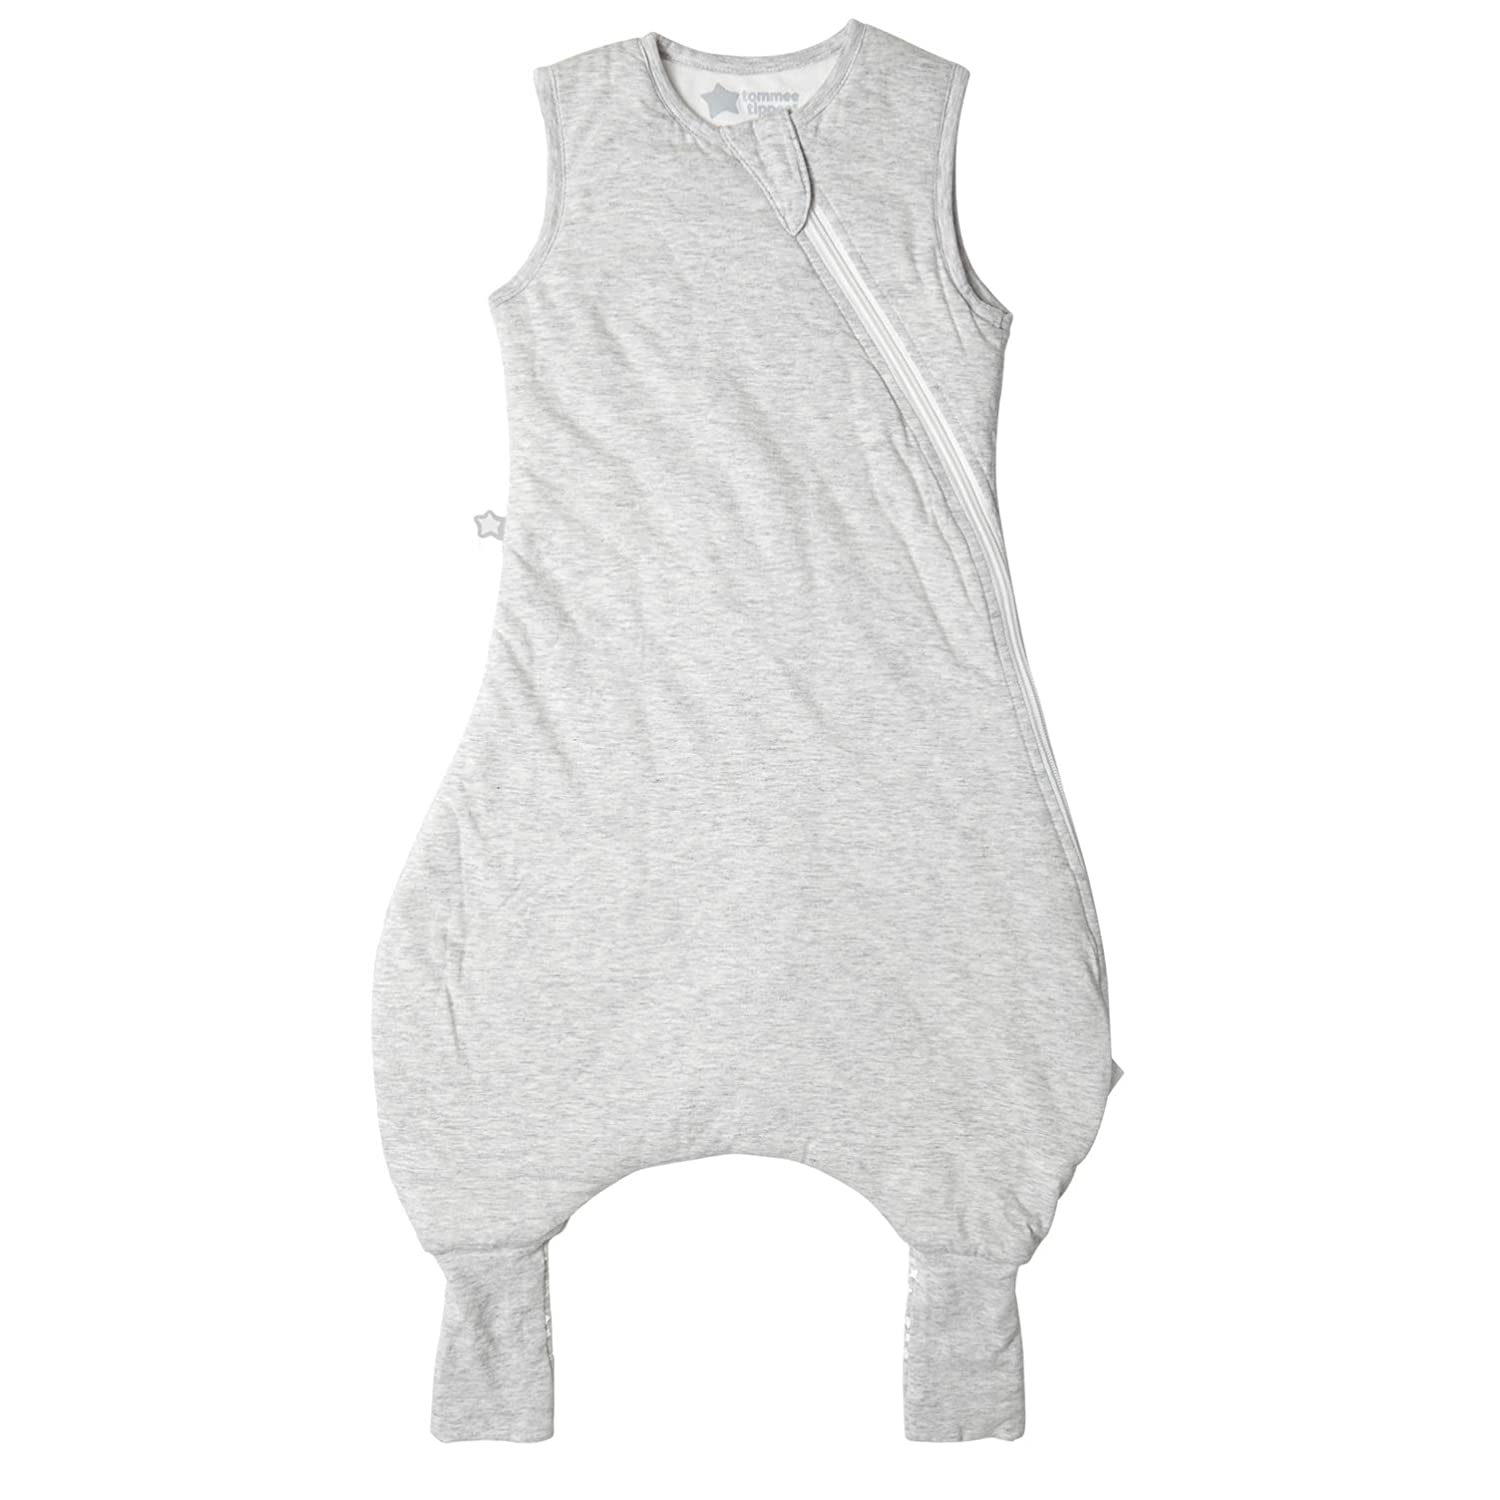 Tommee Tippee The Original Grobag Steppee Babygrow 0-18 Months 0.2 Tog Grey Heather